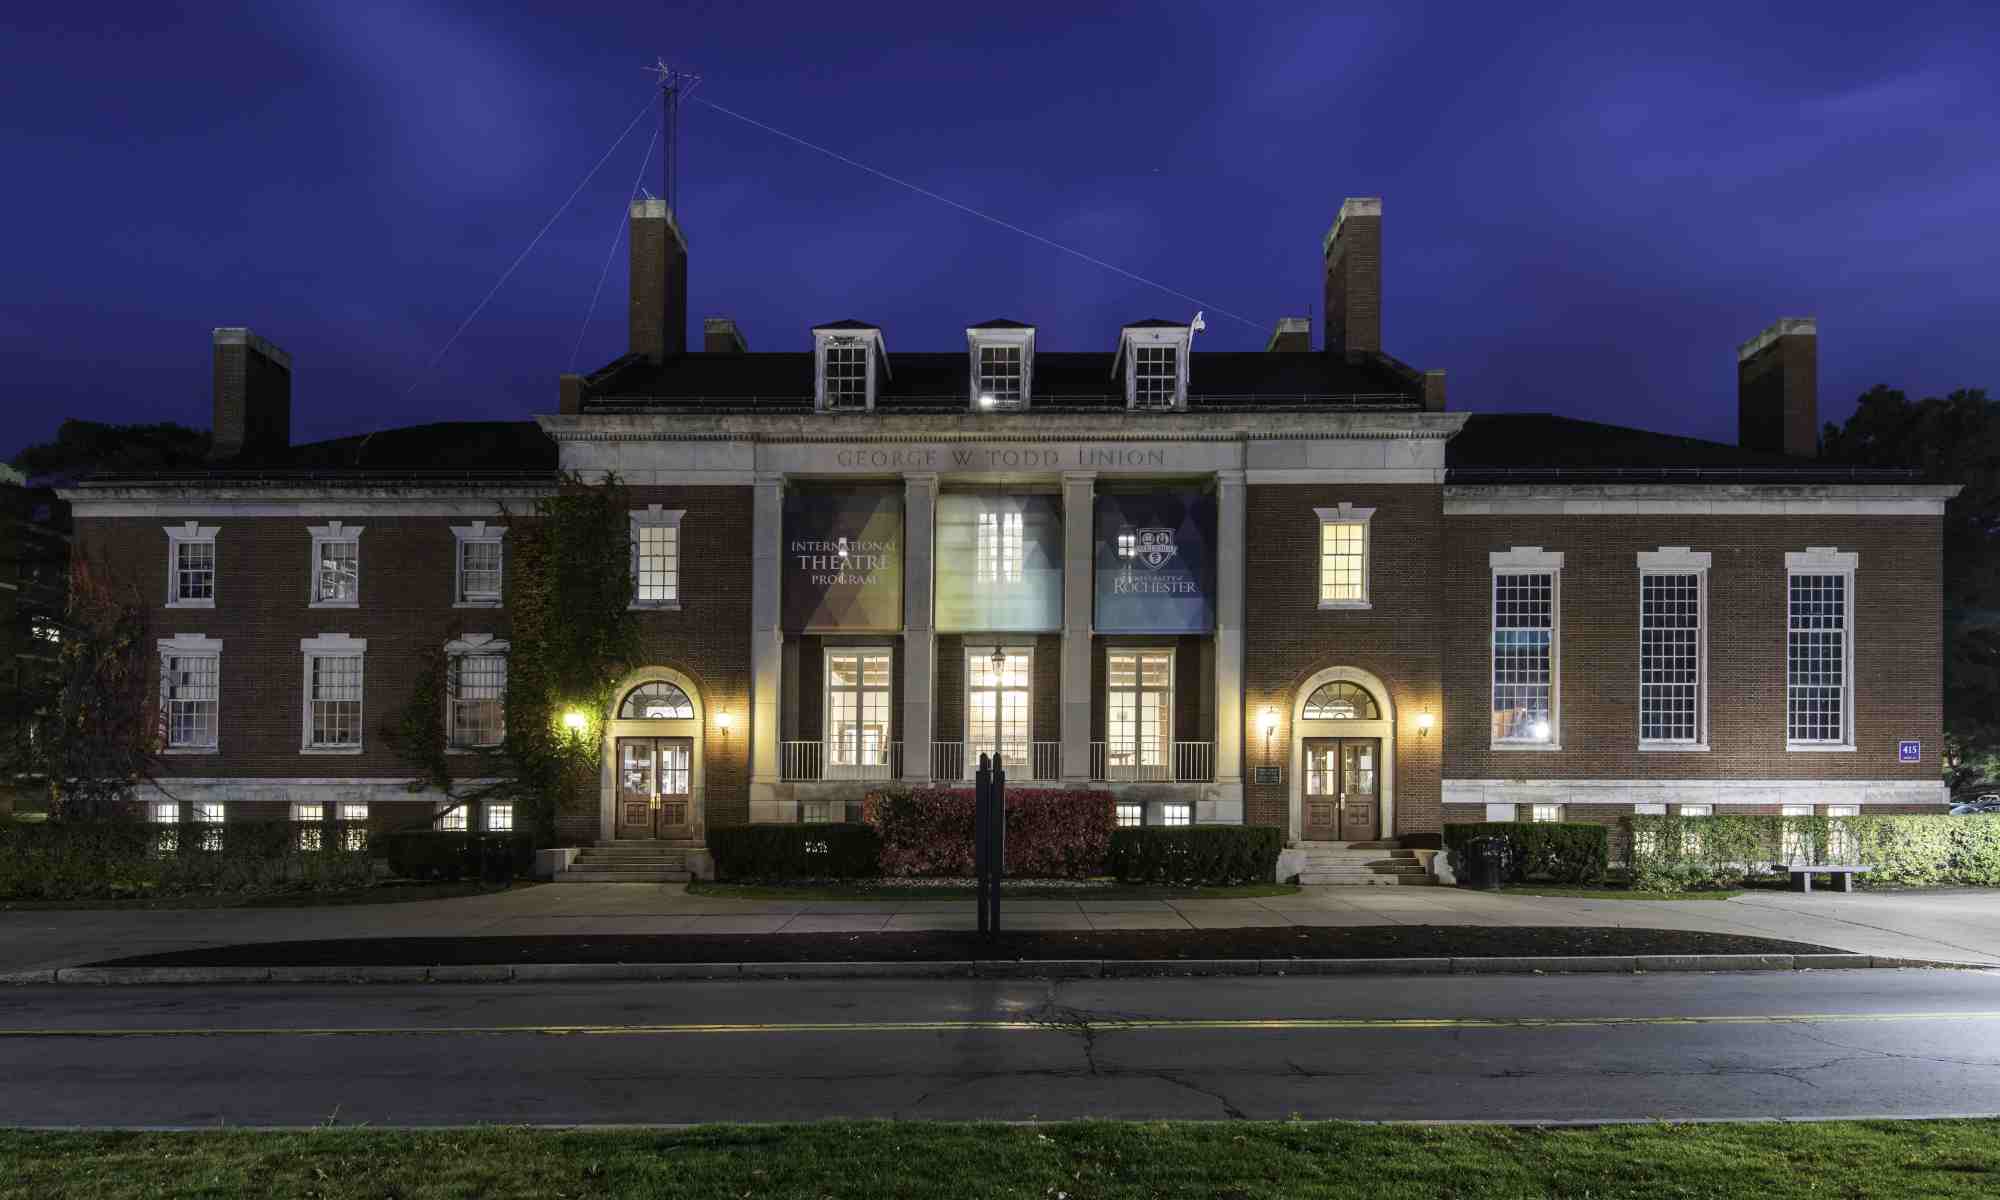 Exterior view of Todd Union at dusk.